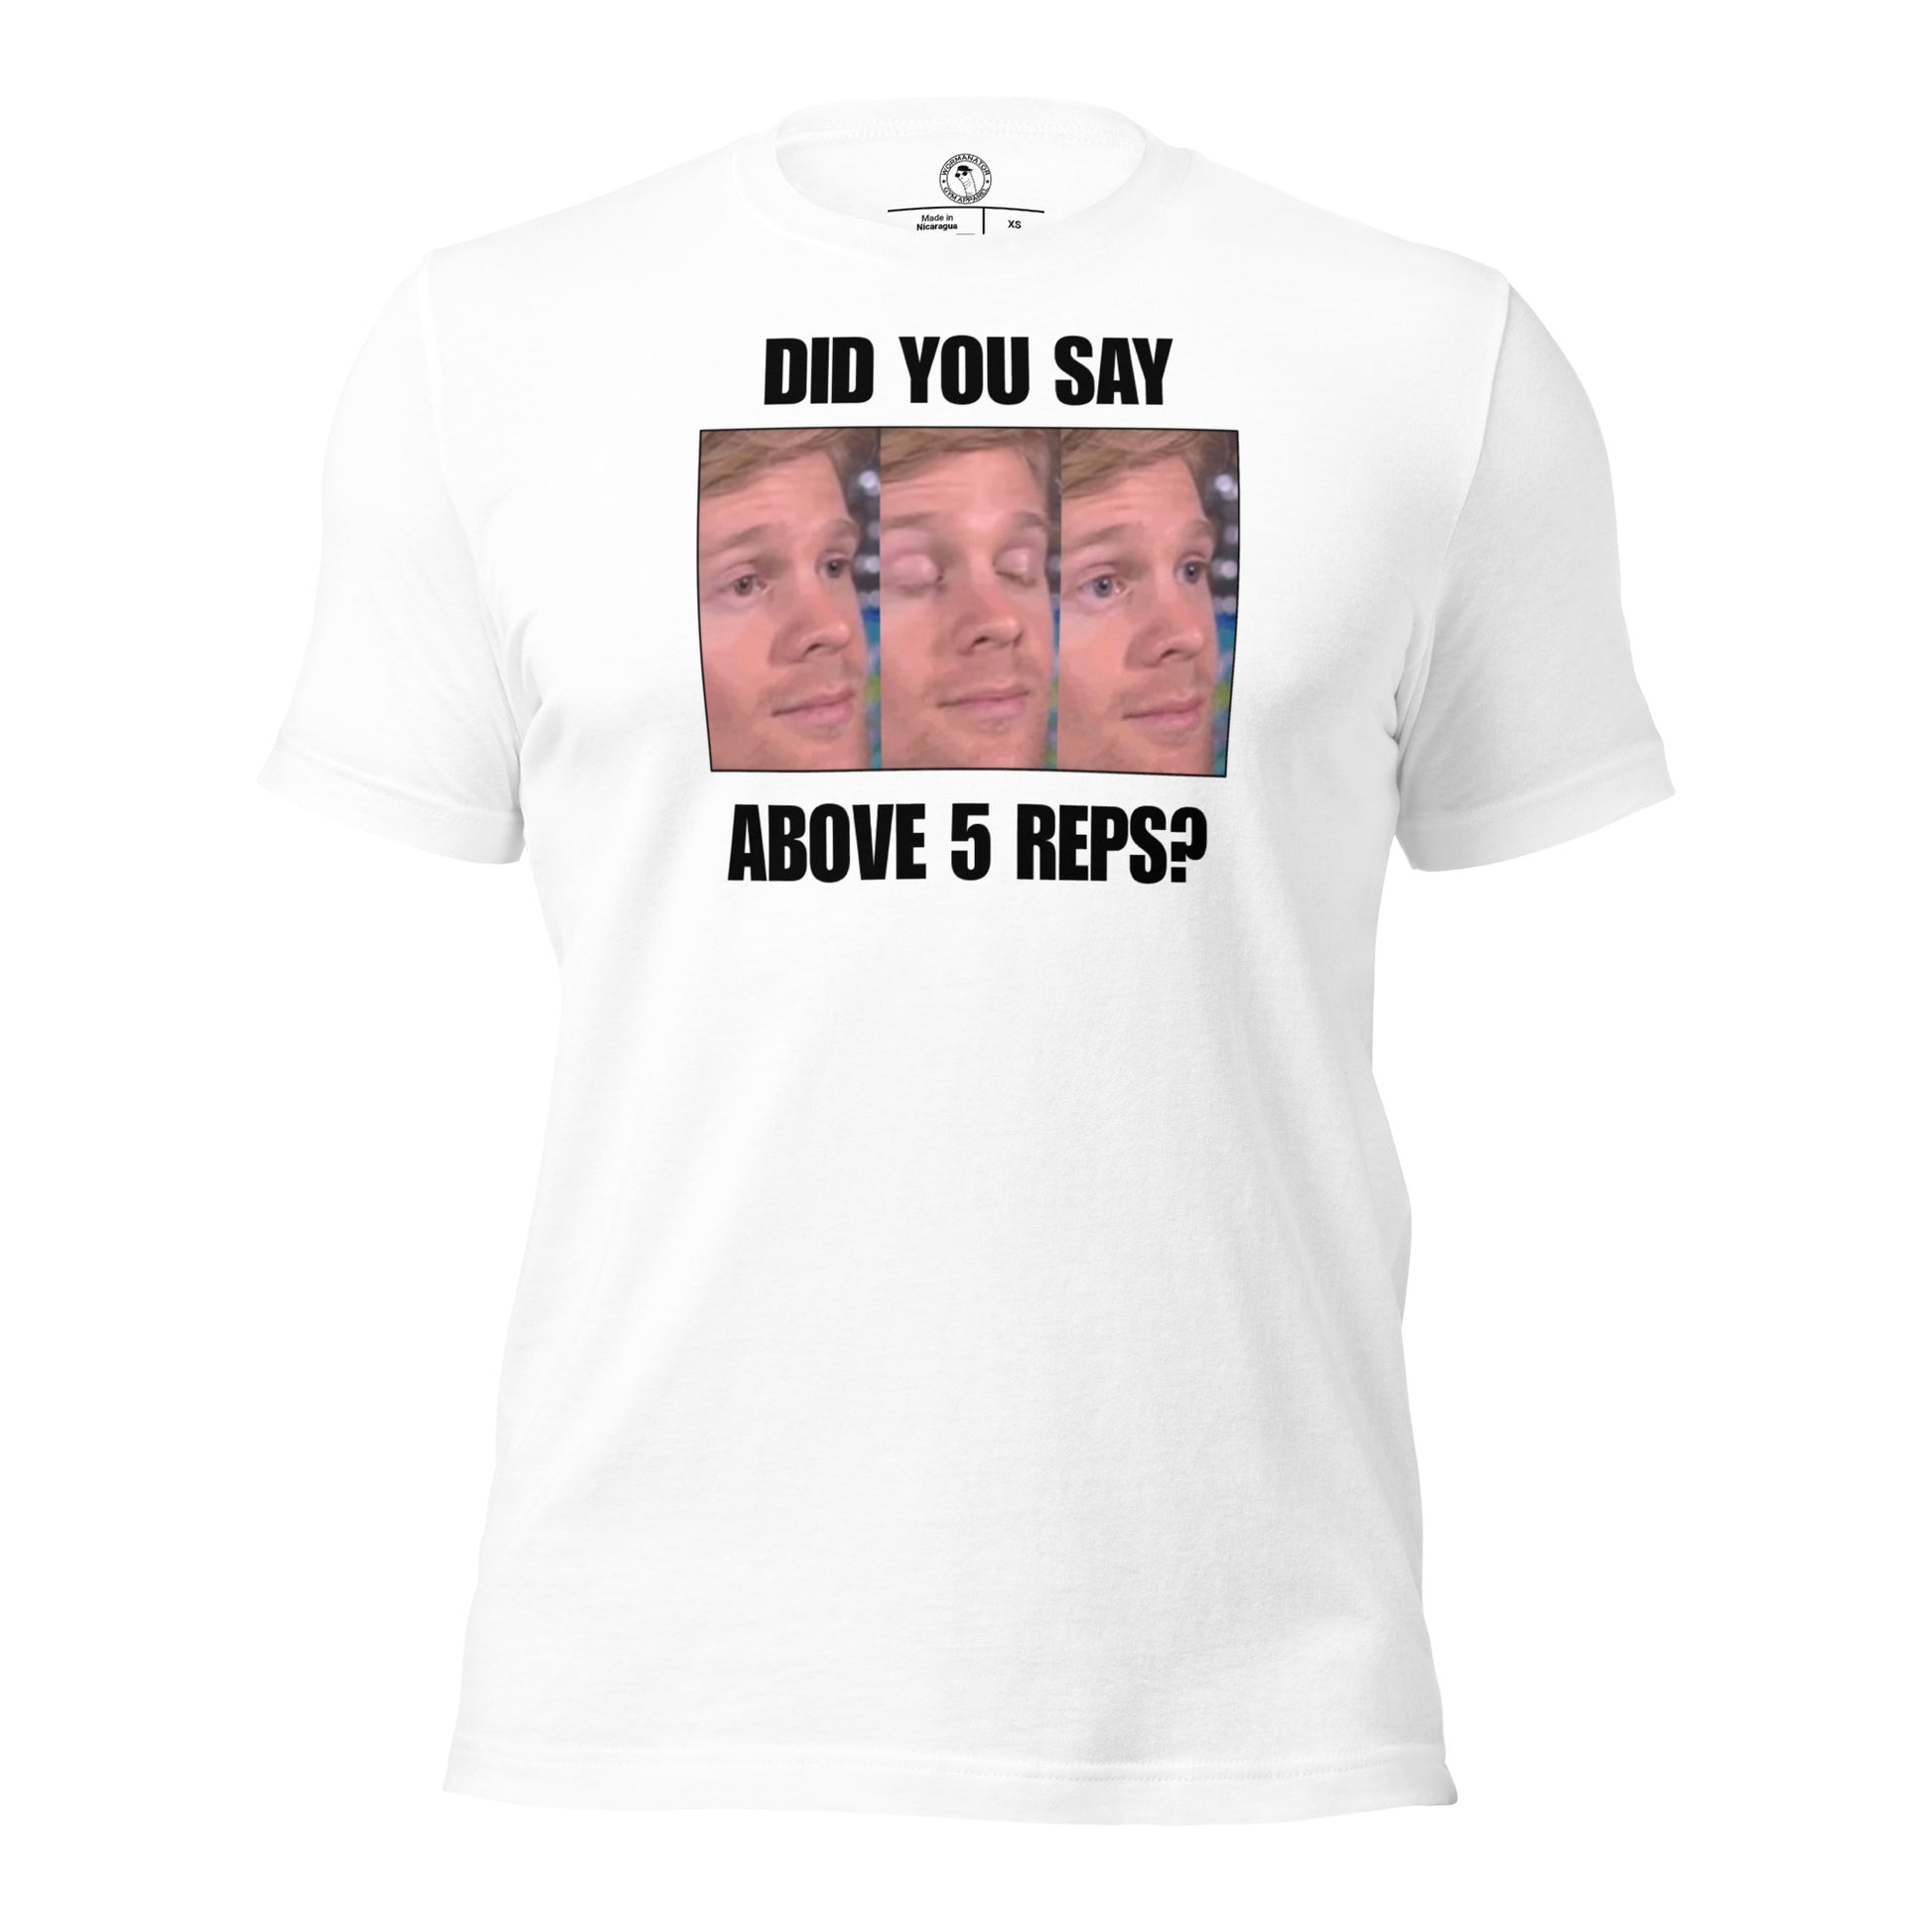 Above 5 Reps is Cardio Shirt in White